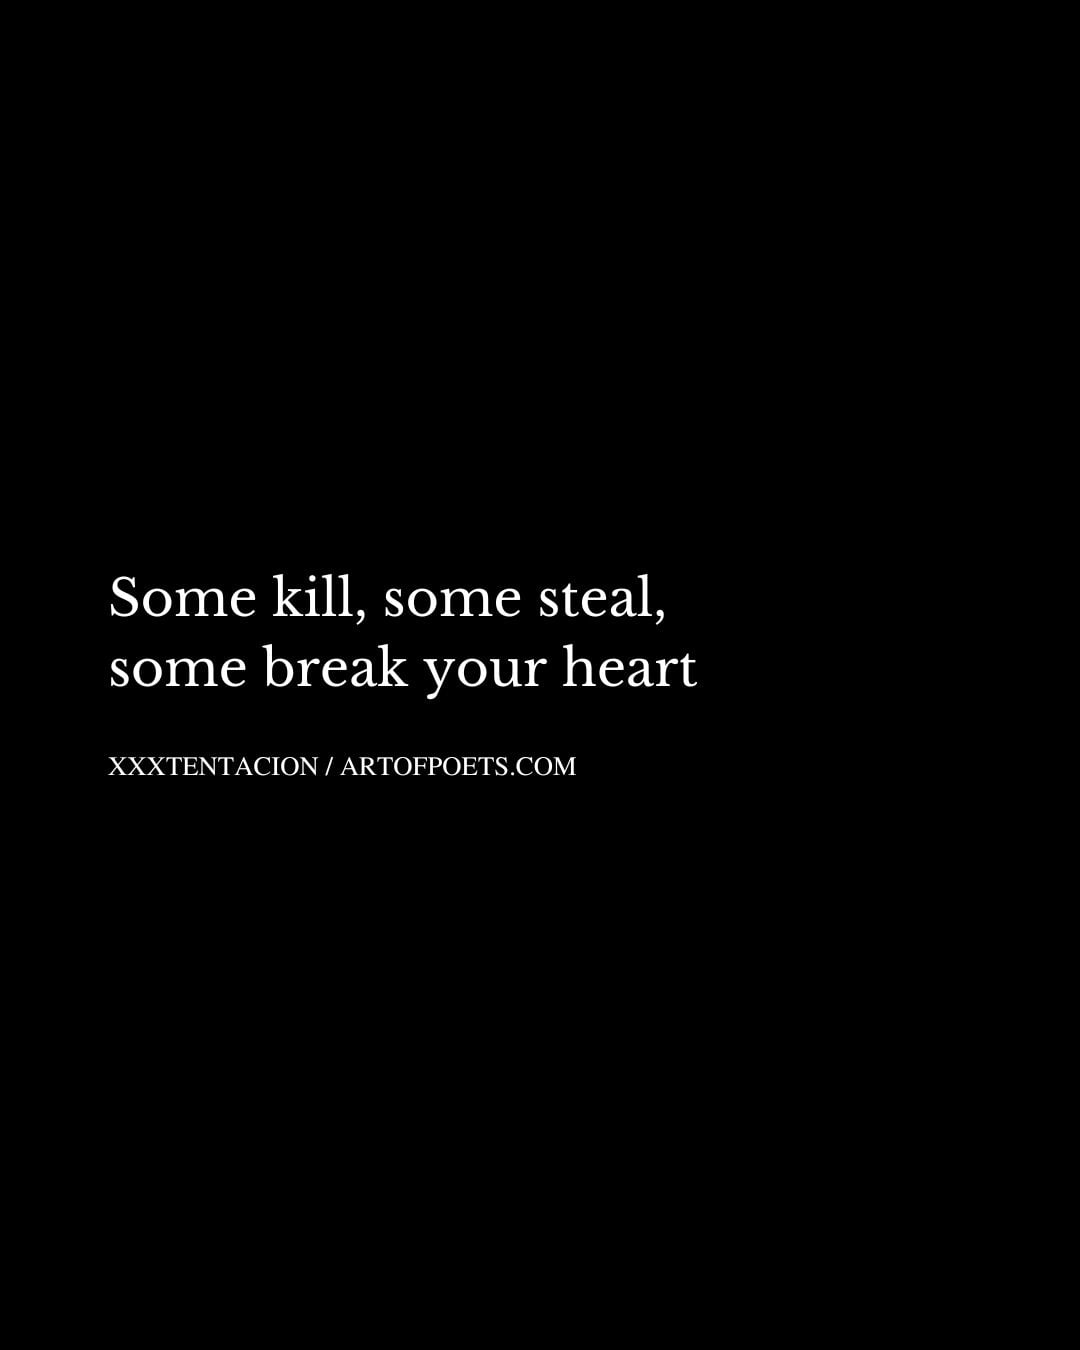 Some kill some steal some break your heart